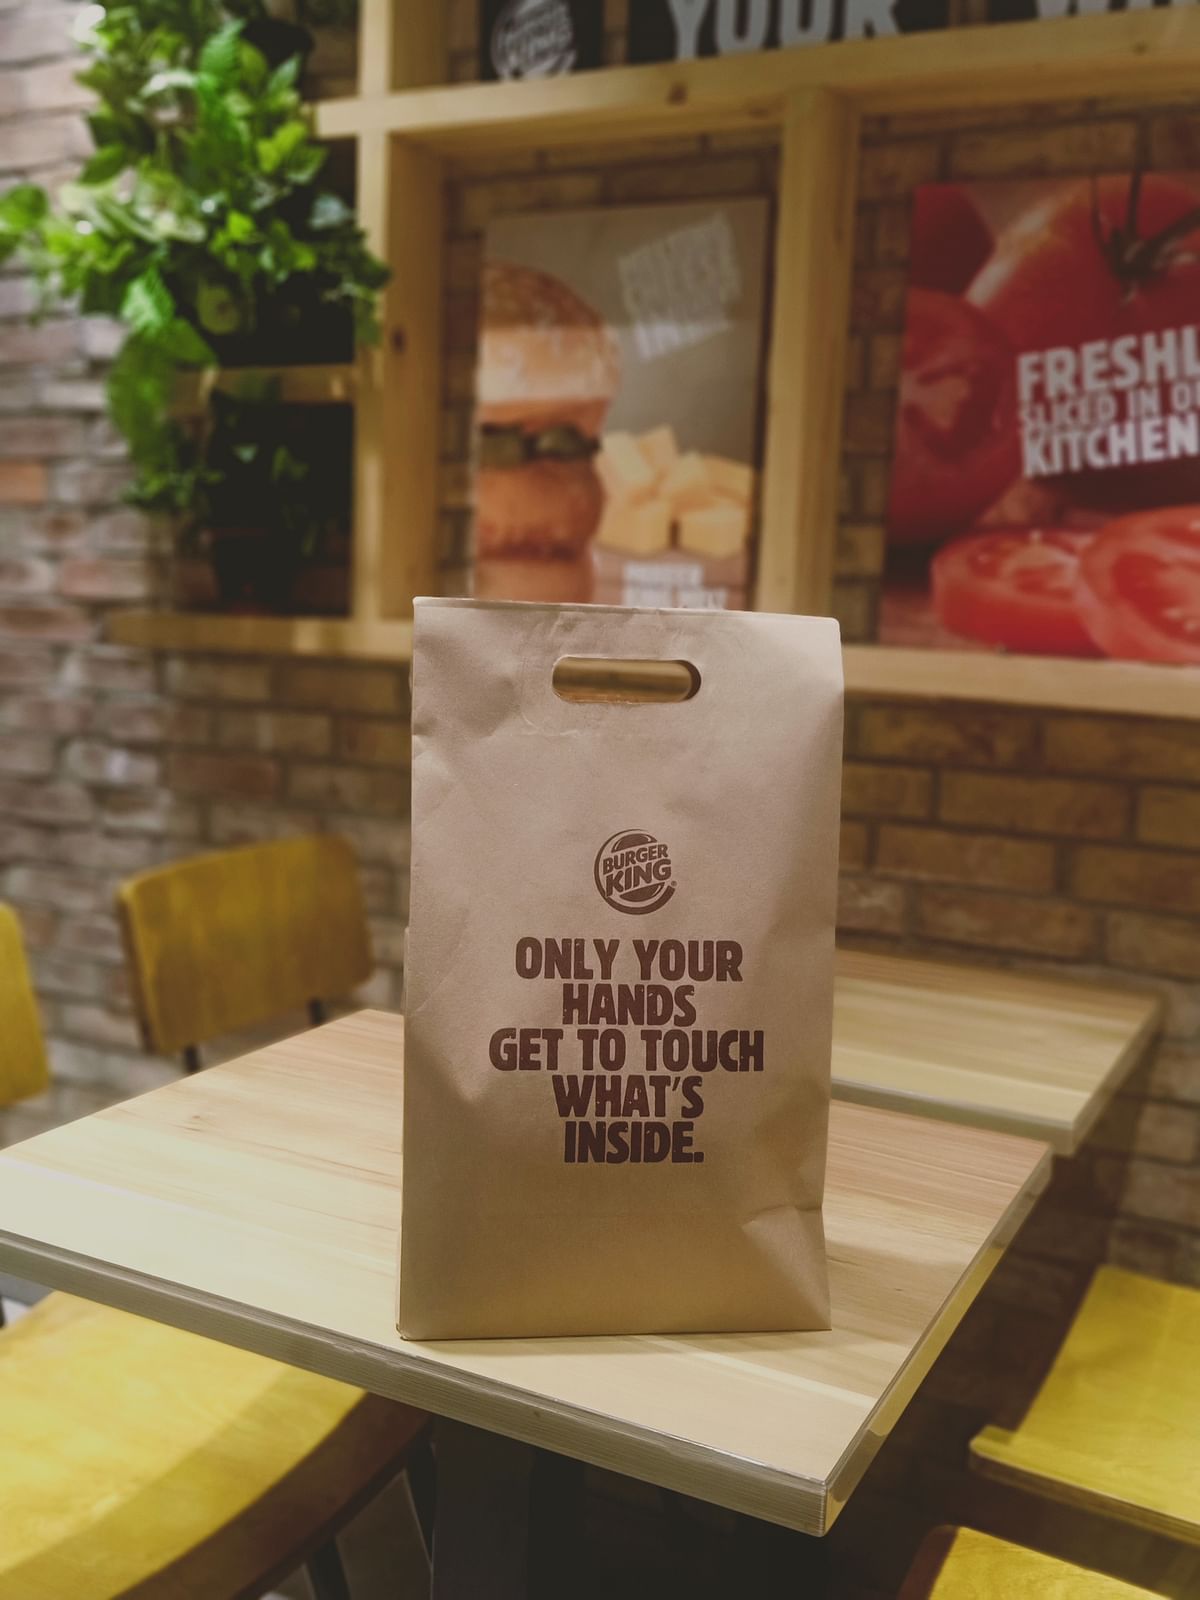 "Good brands adapt in ways that they're still meaningful to customers": Srinivas Adapa, Burger King India